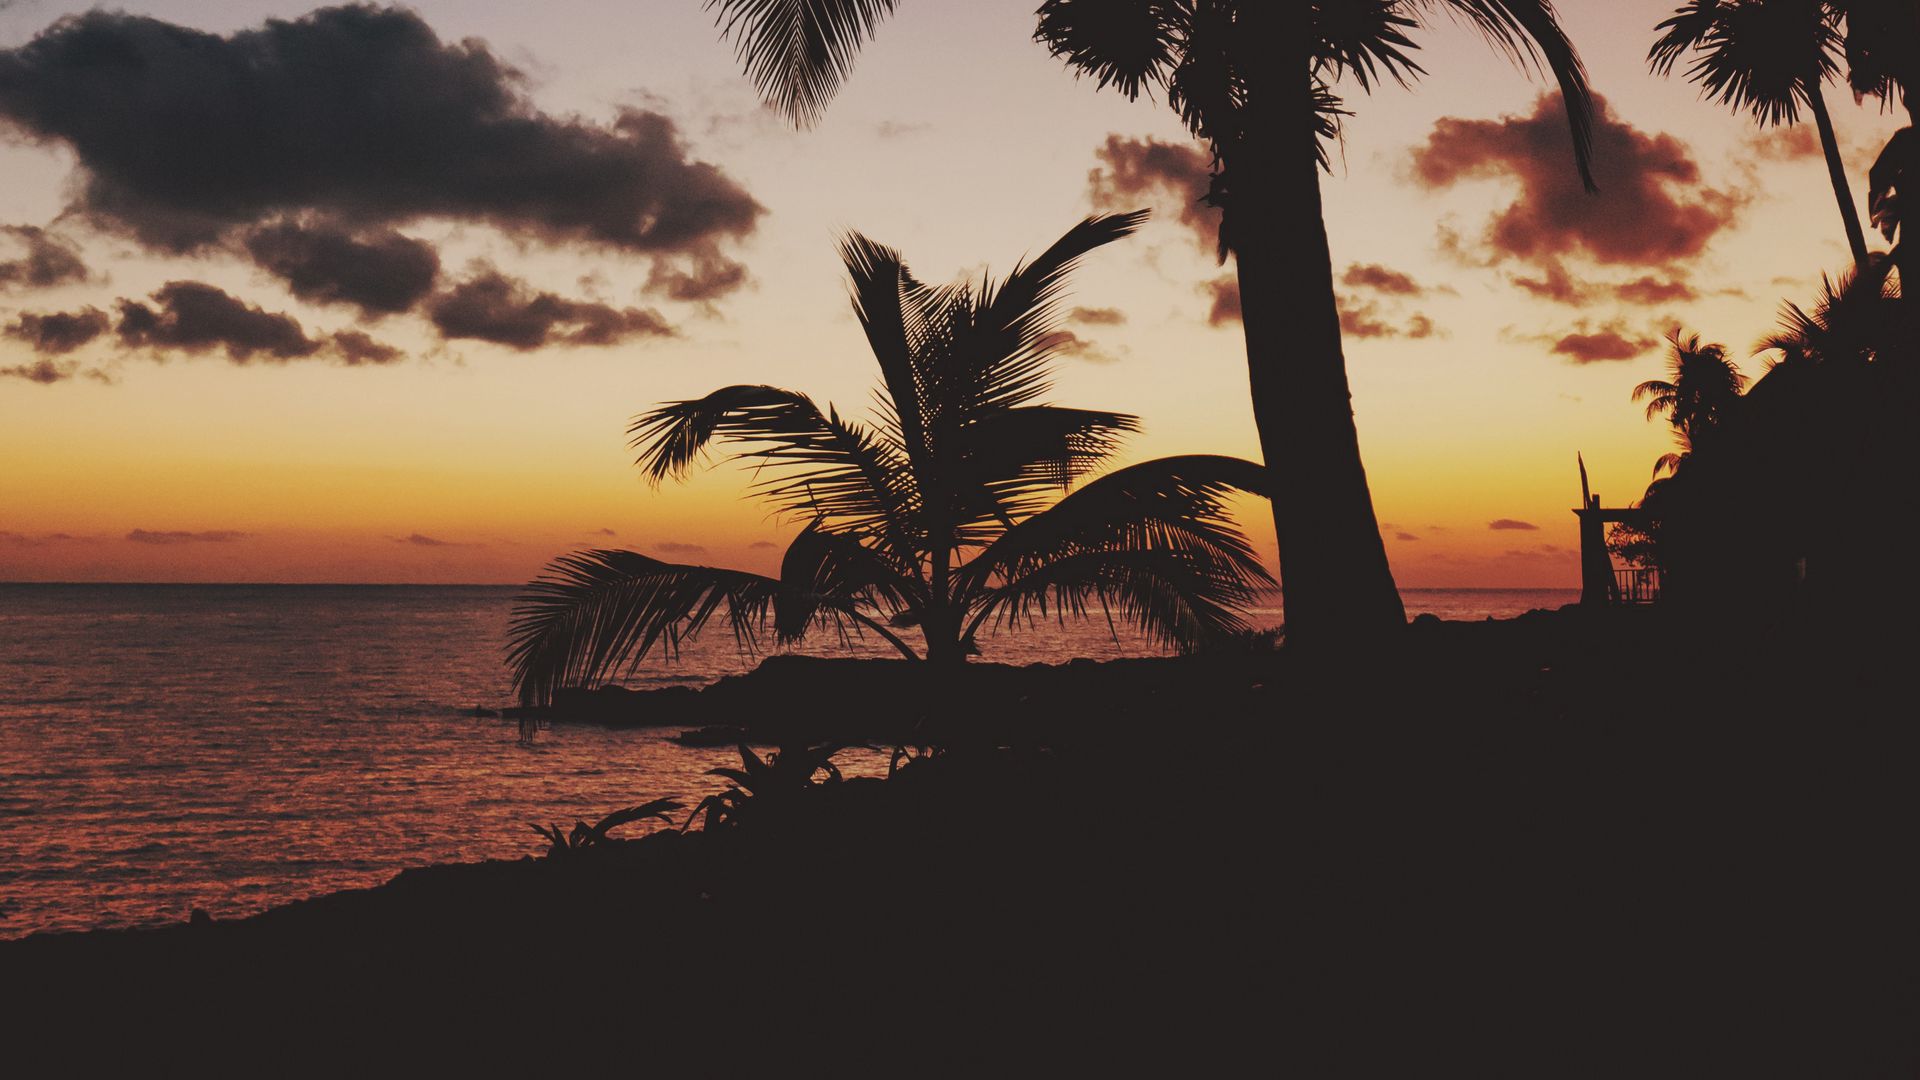 Download wallpaper 1920x1080 palm trees, tropics, sunset, branches ...